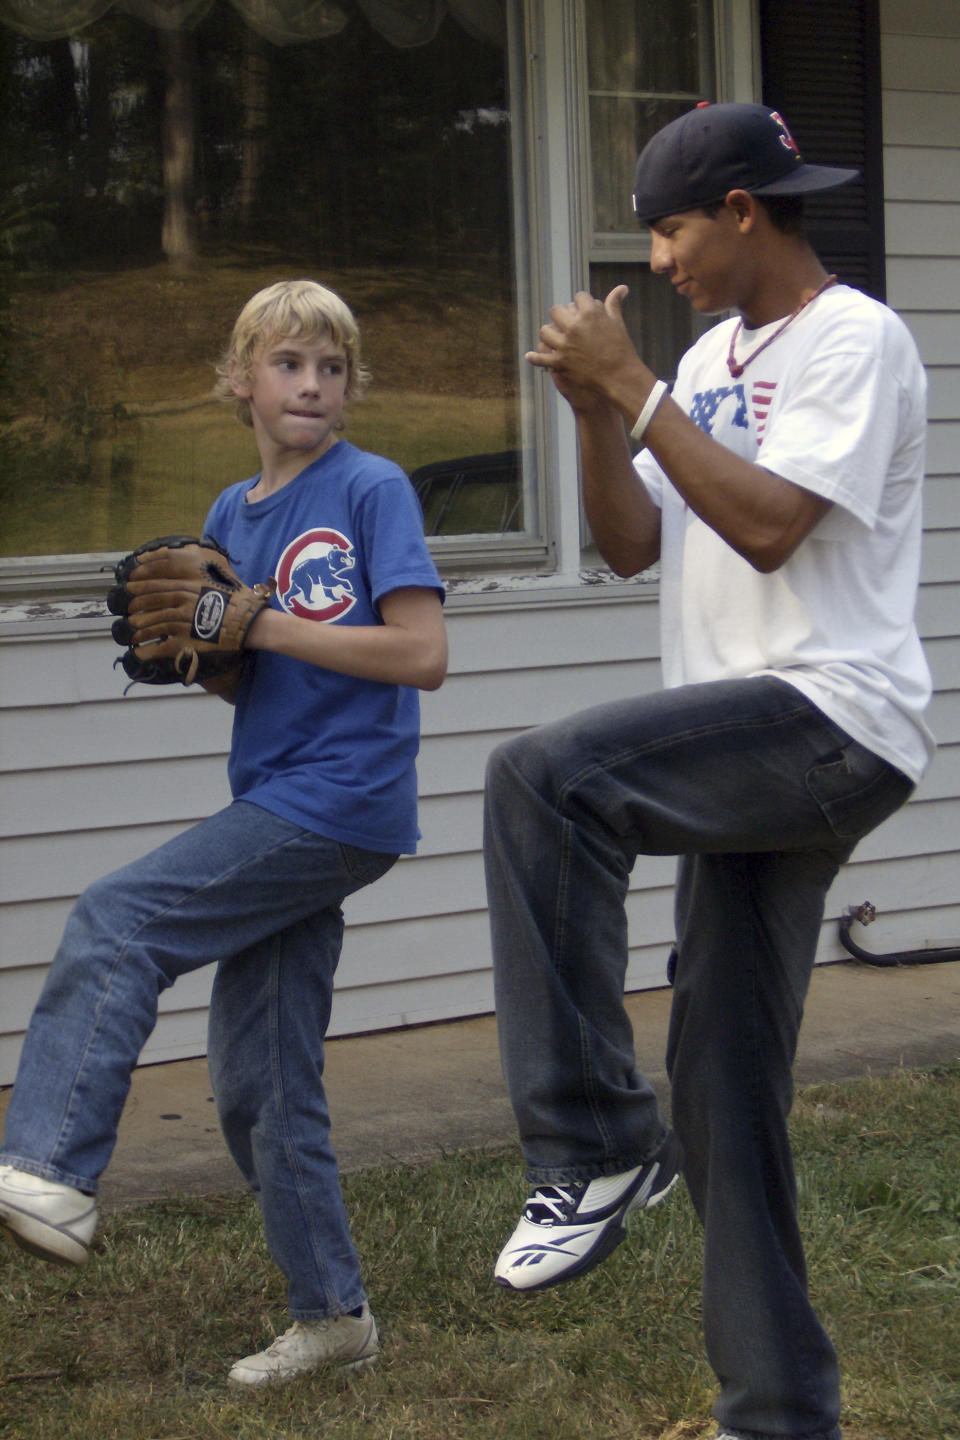 In this photo provided by TeriAnn Reynolds, Mathew Reynolds, left, and minor league baseball player Eduardo Sanchez, of Venezuela, play outside the host family residence in Johnson City, Tenn., in August 2007. The role of host families varied from place to place, but for most, it was pretty basic. Players usually got a room, a bed and access to a few good meals each day. (Photo courtesy TeriAnn Reynolds via AP)